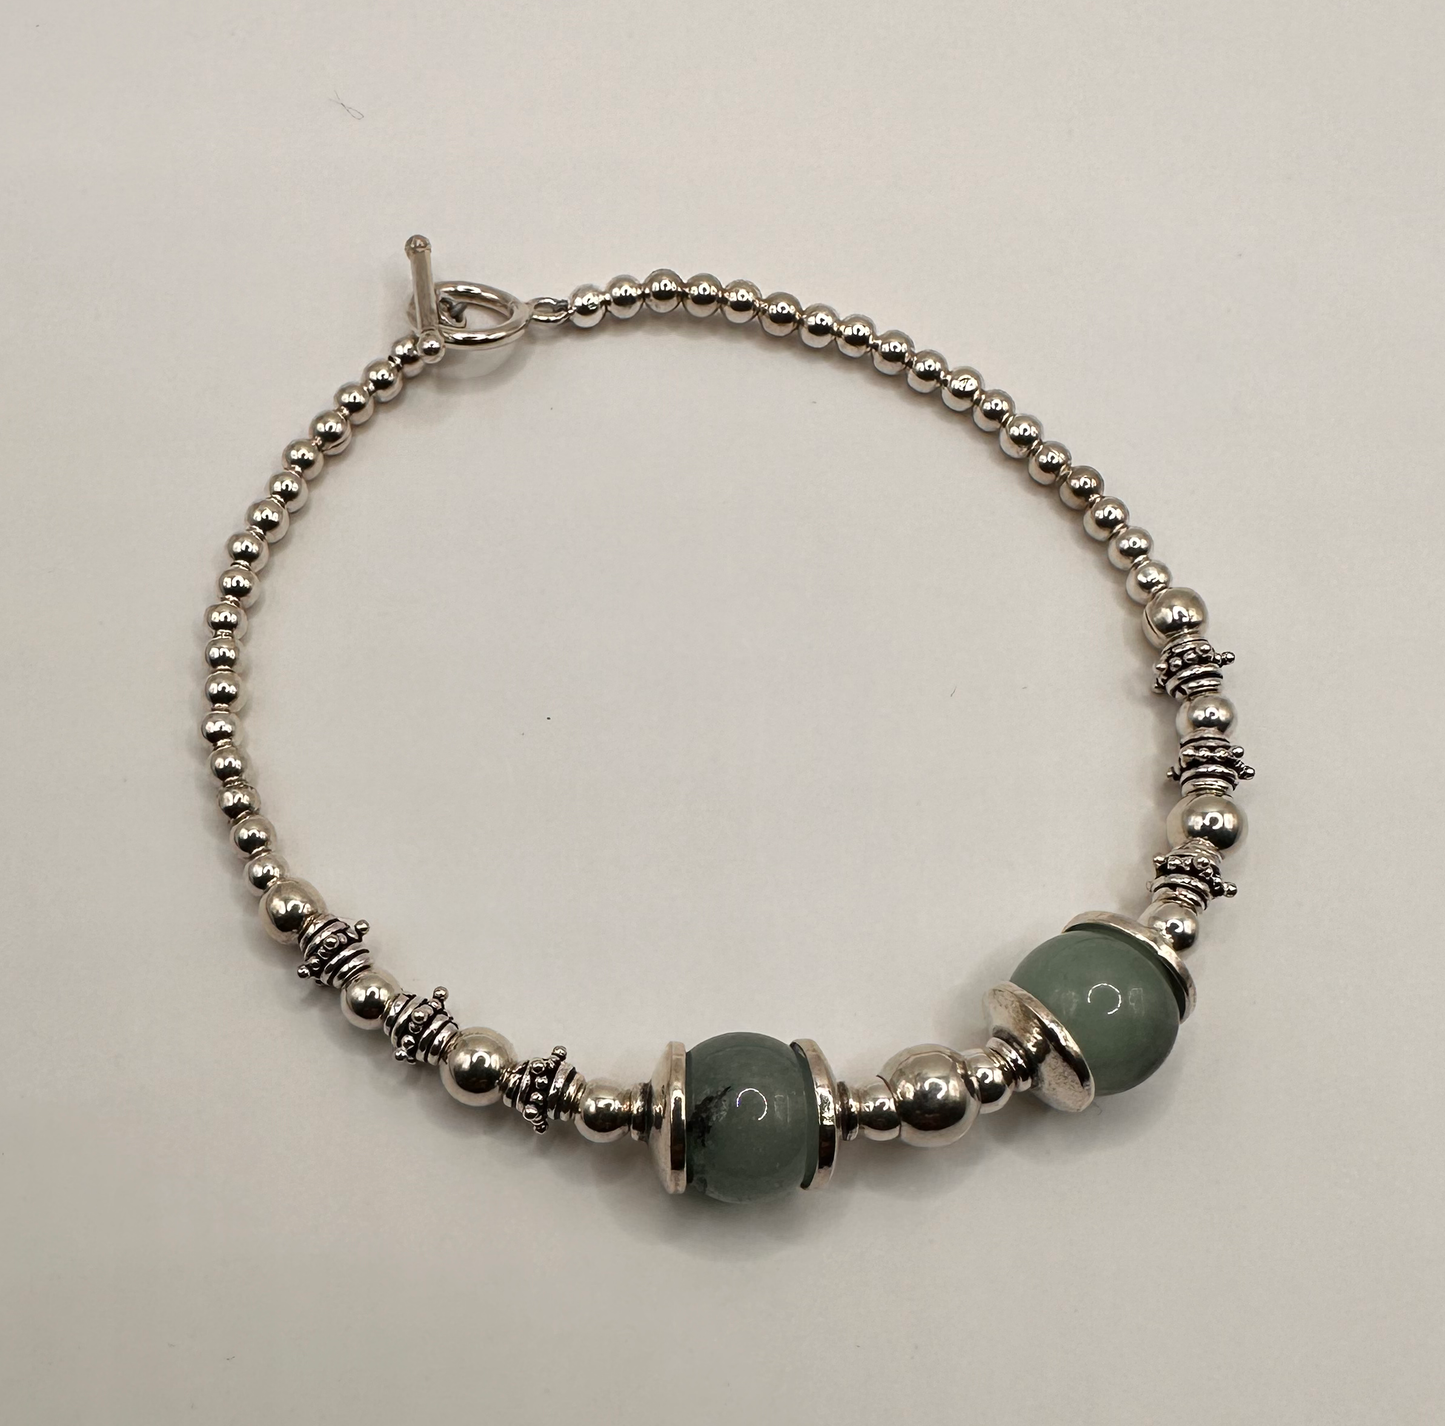 Green Aventurine with Sterling Silver Accent Bead Bracelet